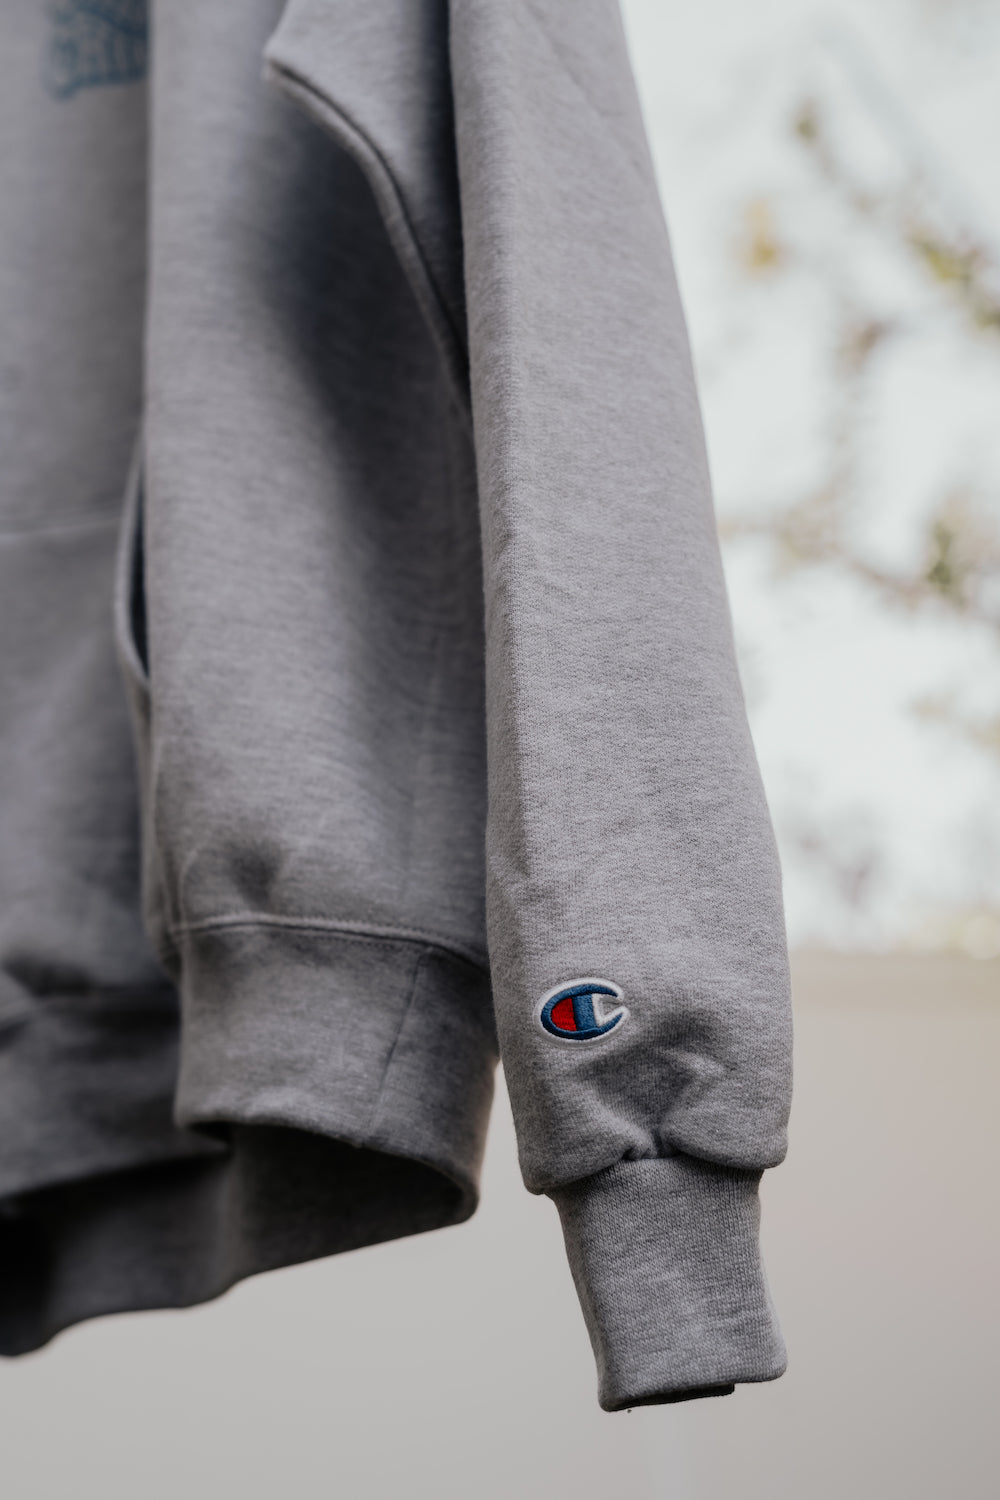 – BAND AUTHENTIC CHIEF (GREY) X ECO® HOODIE CHAMPION CHIEF